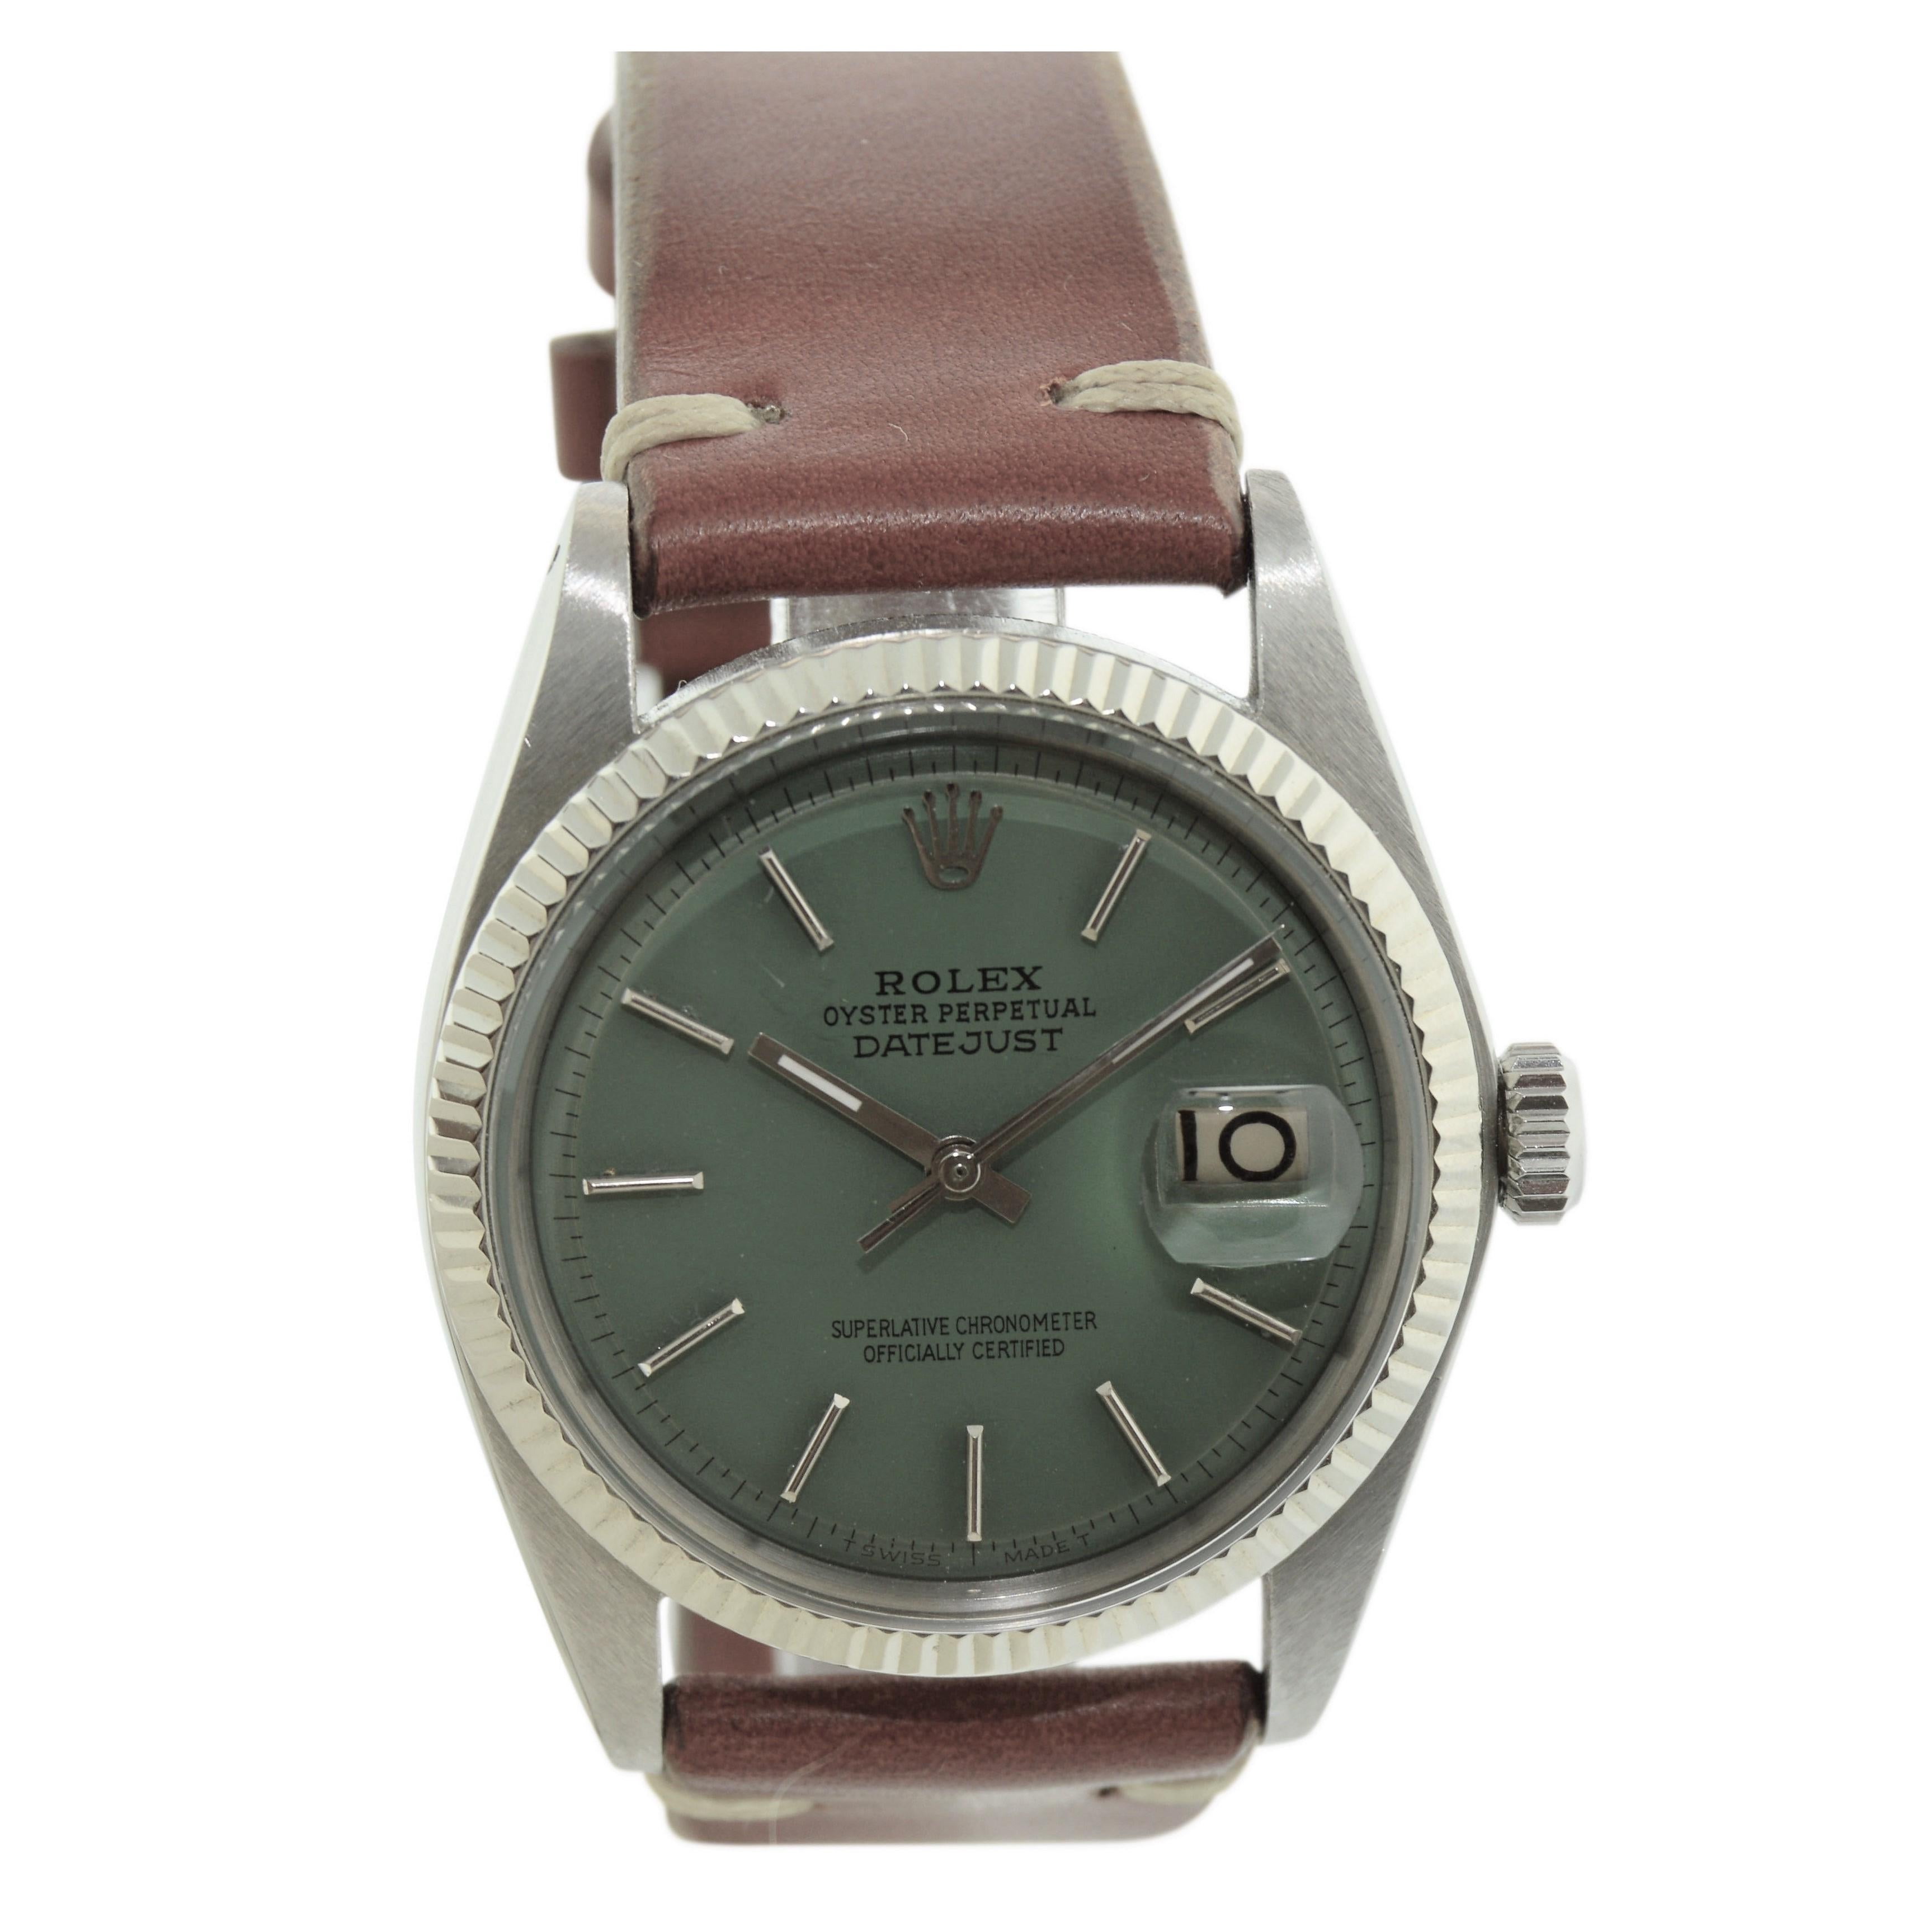 FACTORY / HOUSE: Rolex Watch Company
STYLE / REFERENCE: Datejust / Reference 1601
METAL / MATERIAL: Stainless Steel w/ White Gold Bezel
DIMENSIONS:  42mm X 36mm
CIRCA: 1960's
MOVEMENT / CALIBER: Perpetual Winding / 26 Jewels / Caliber 1570
DIAL /